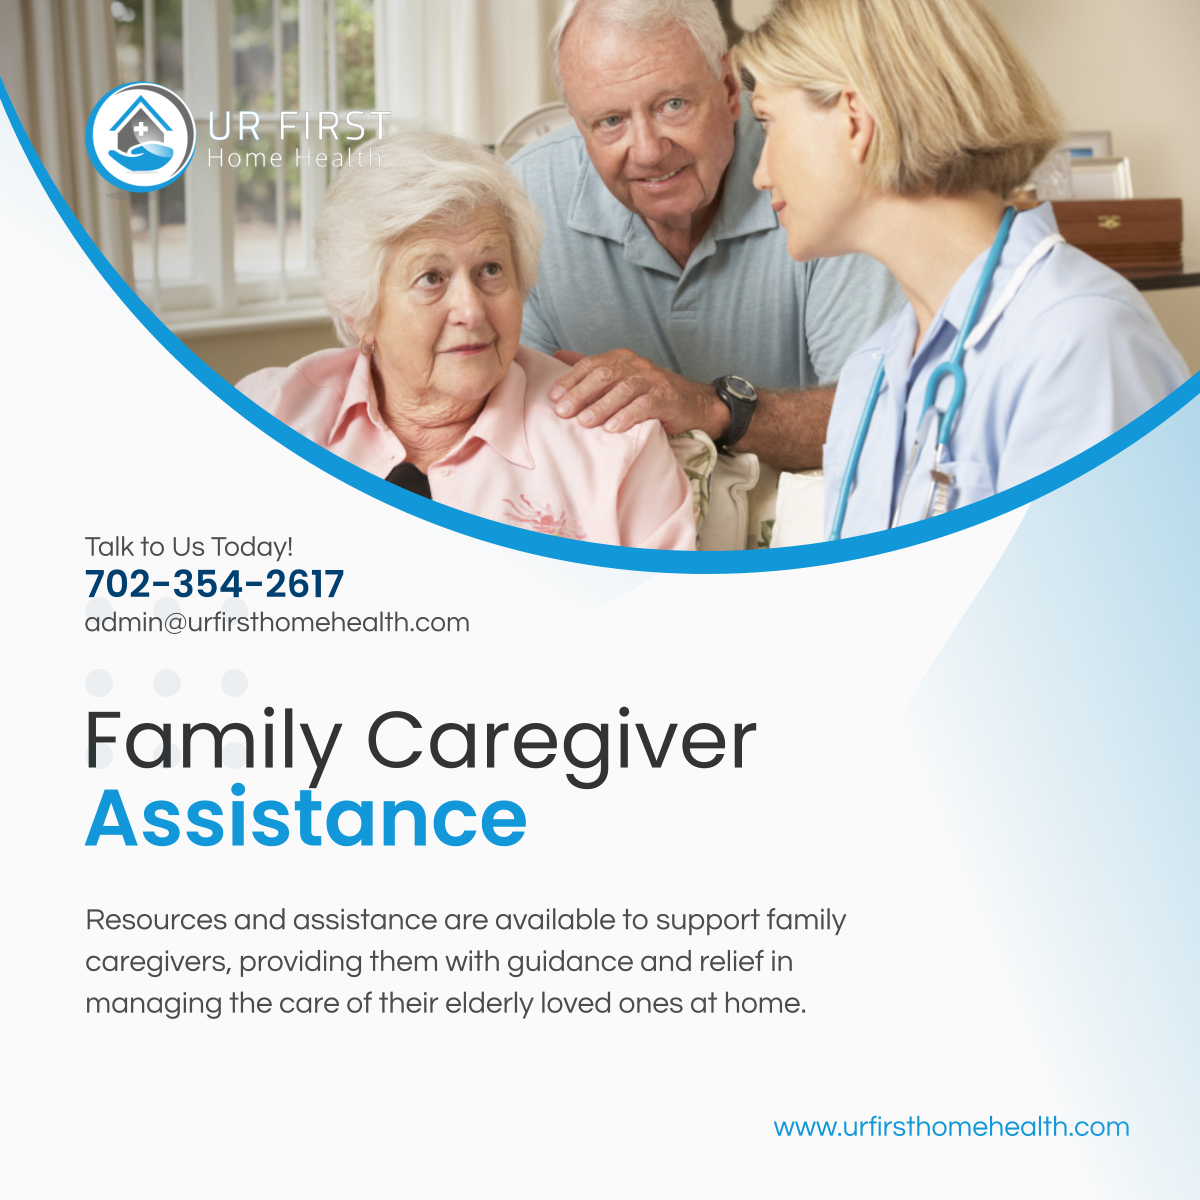 Care for your loved ones while caring for yourself. Discover our caregiver assistance program and take a step towards peace of mind. 

#LasVegasNV #HomeHealthCare #CaregiverSupport #FamilyCare #HealthAssistance